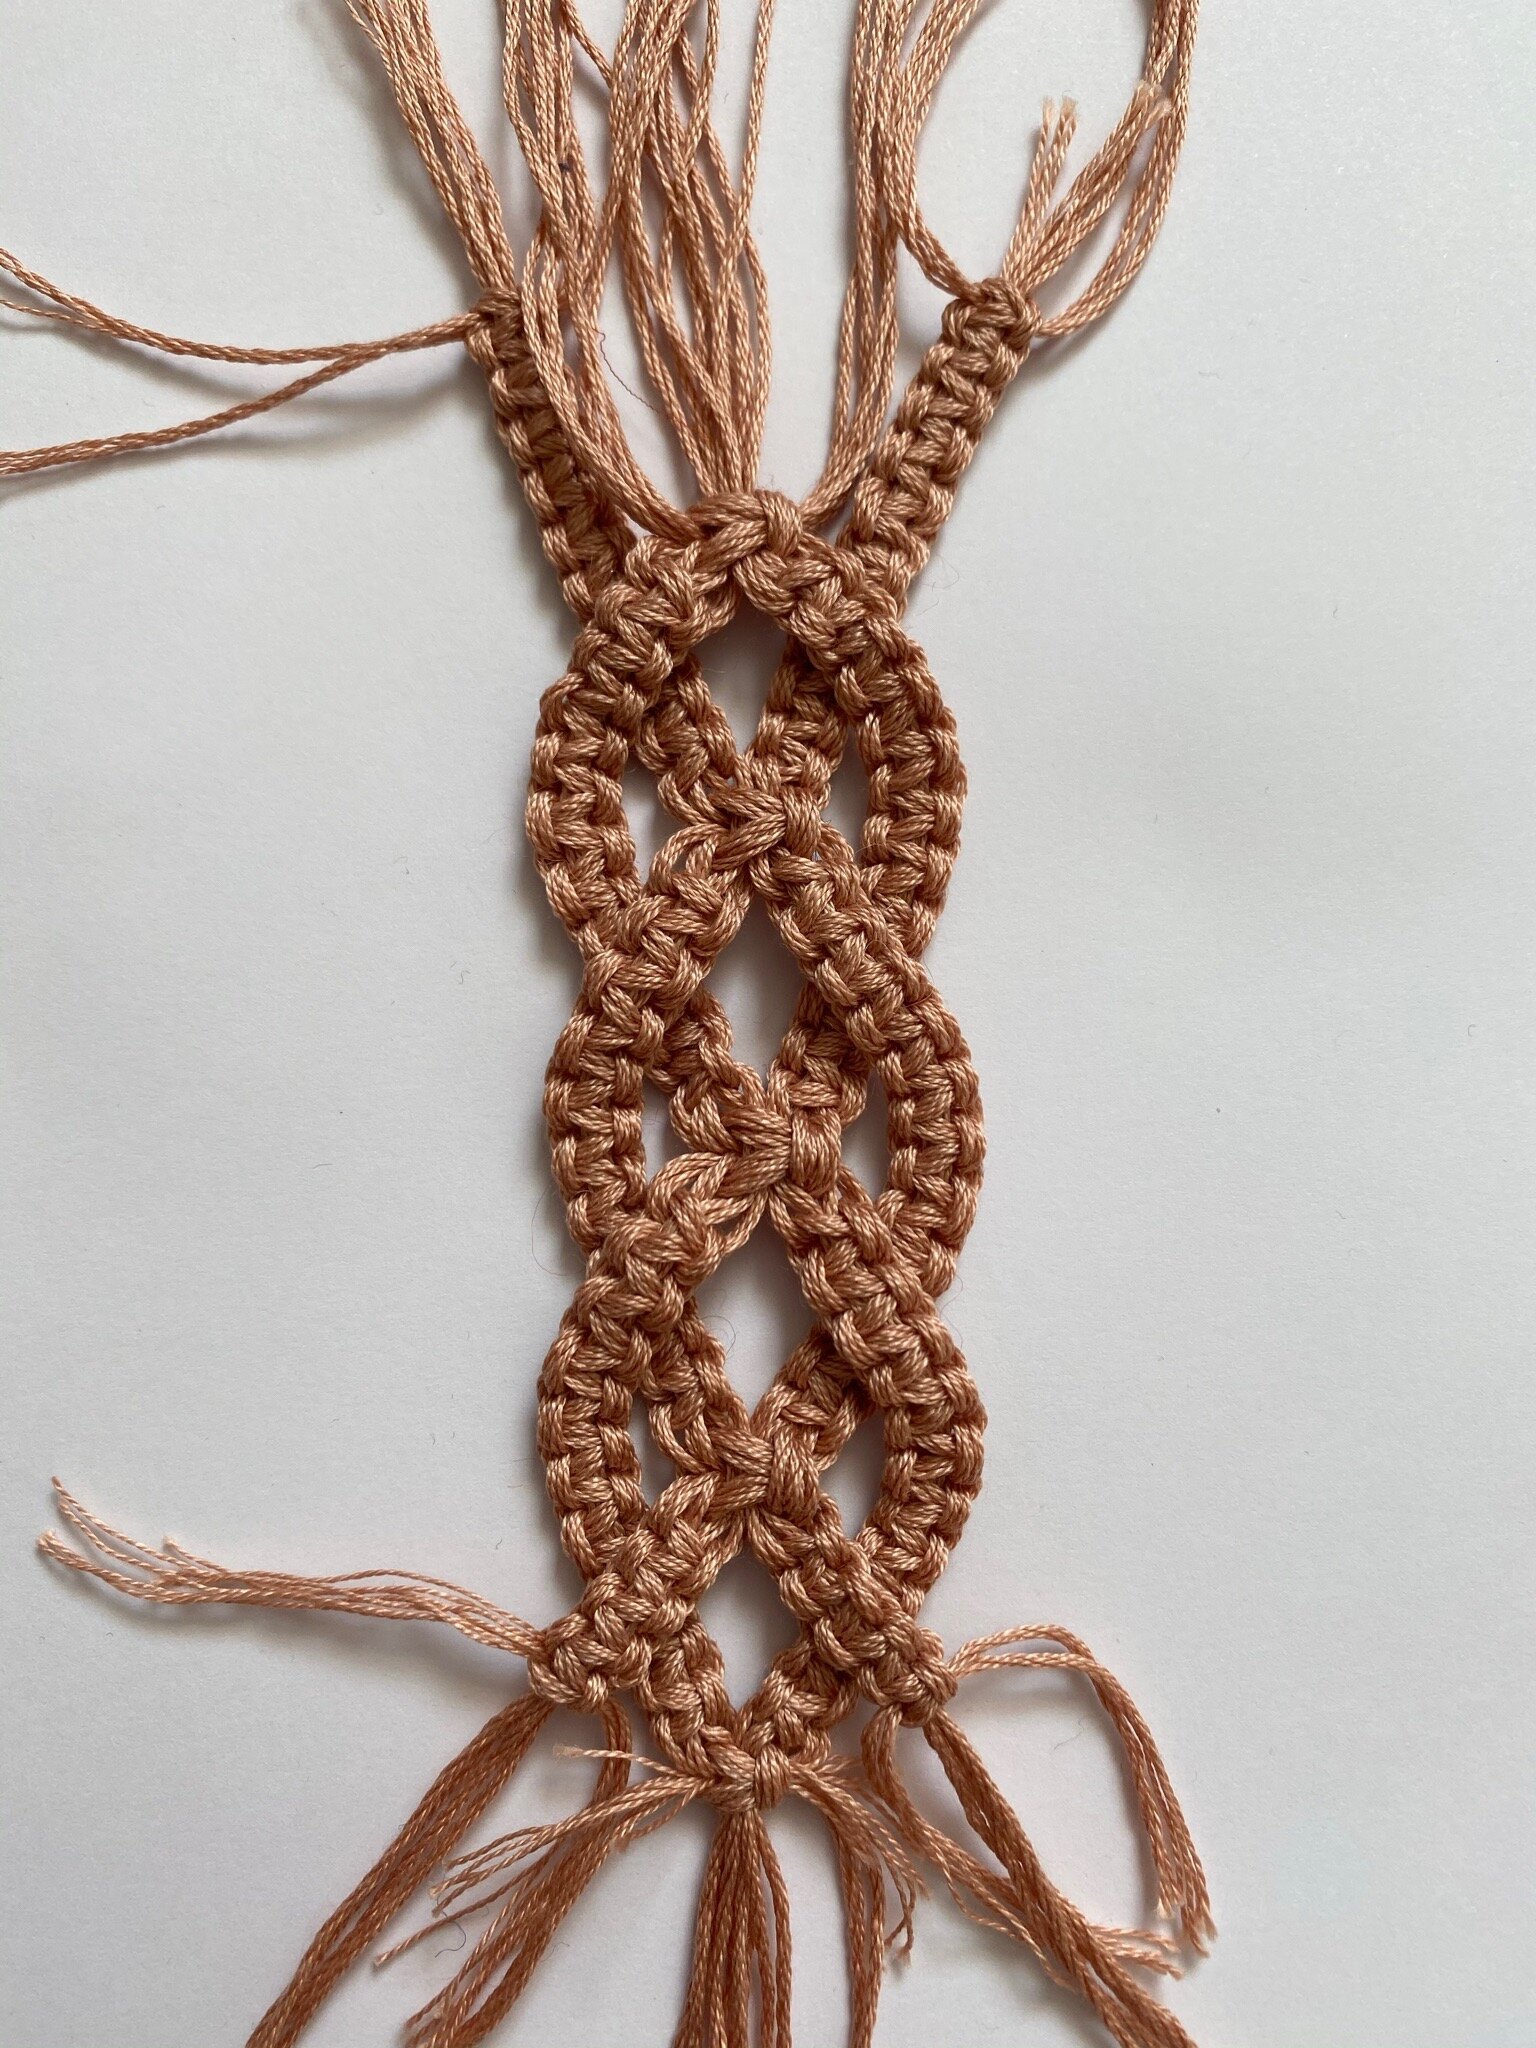  Macrame braid sample for special project 